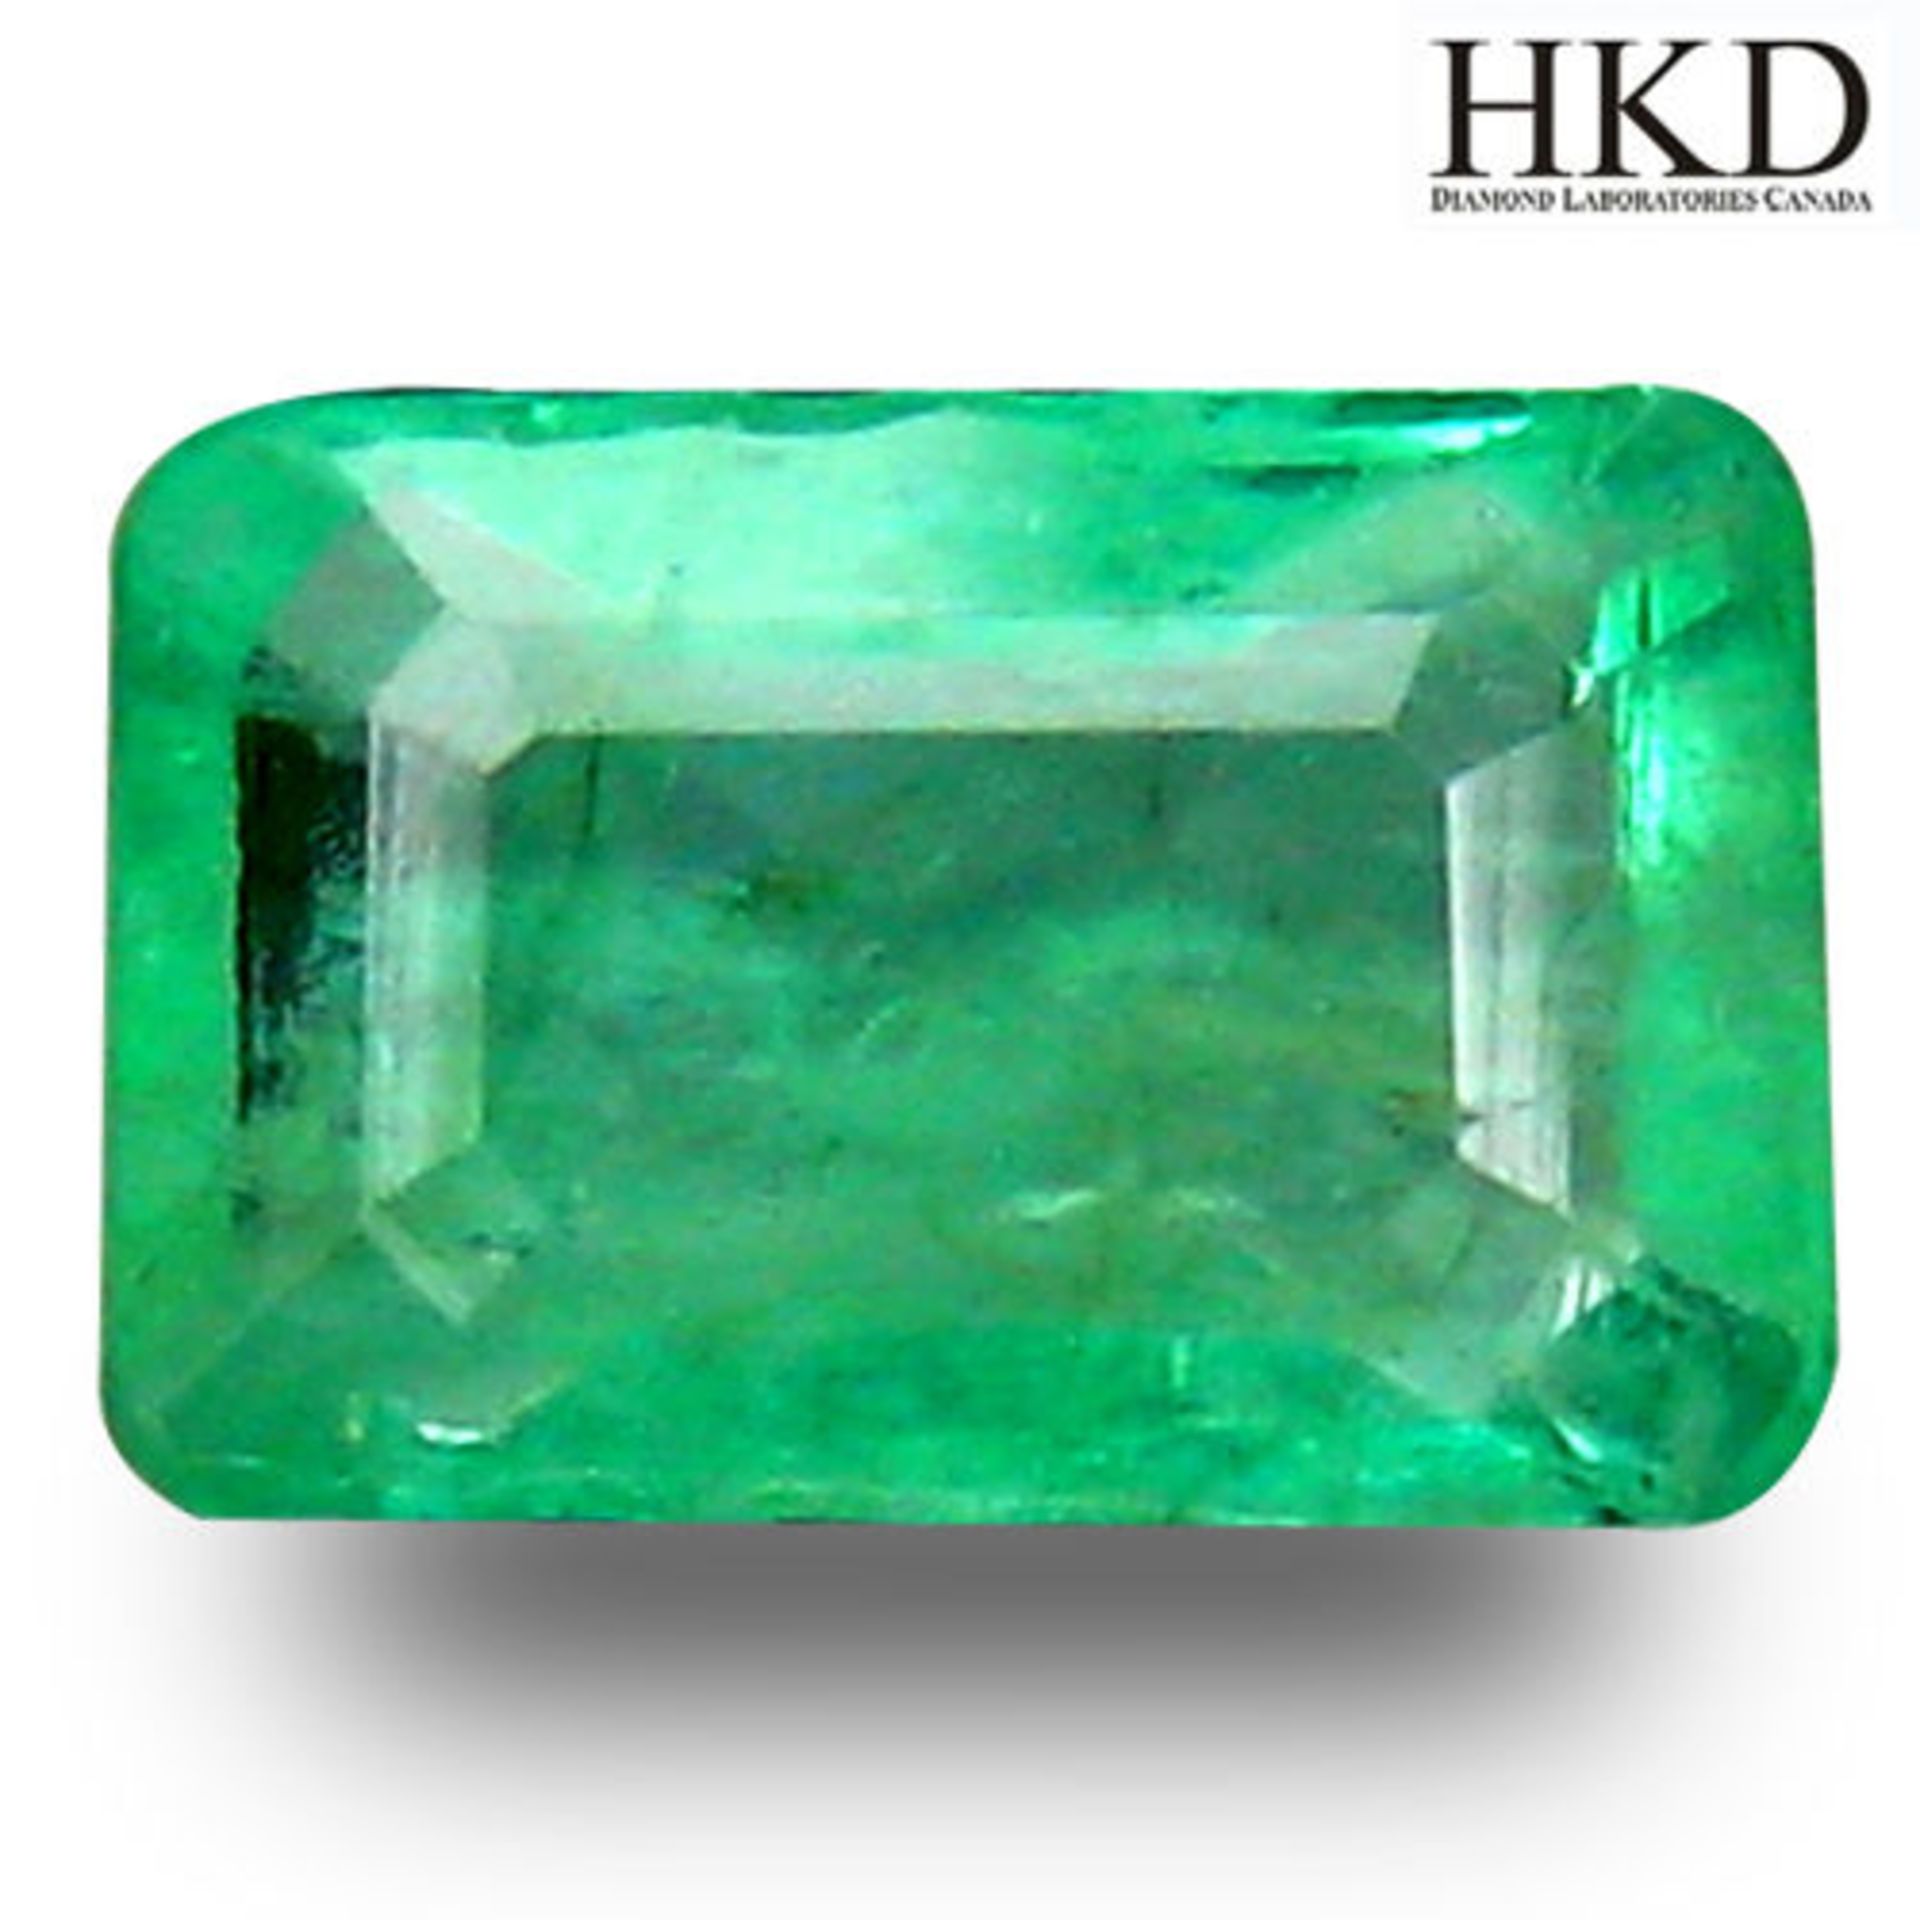 Emerald 0.6ct Gem With Certificate - Gem Valued At $1035.73 (Approx £675.78)